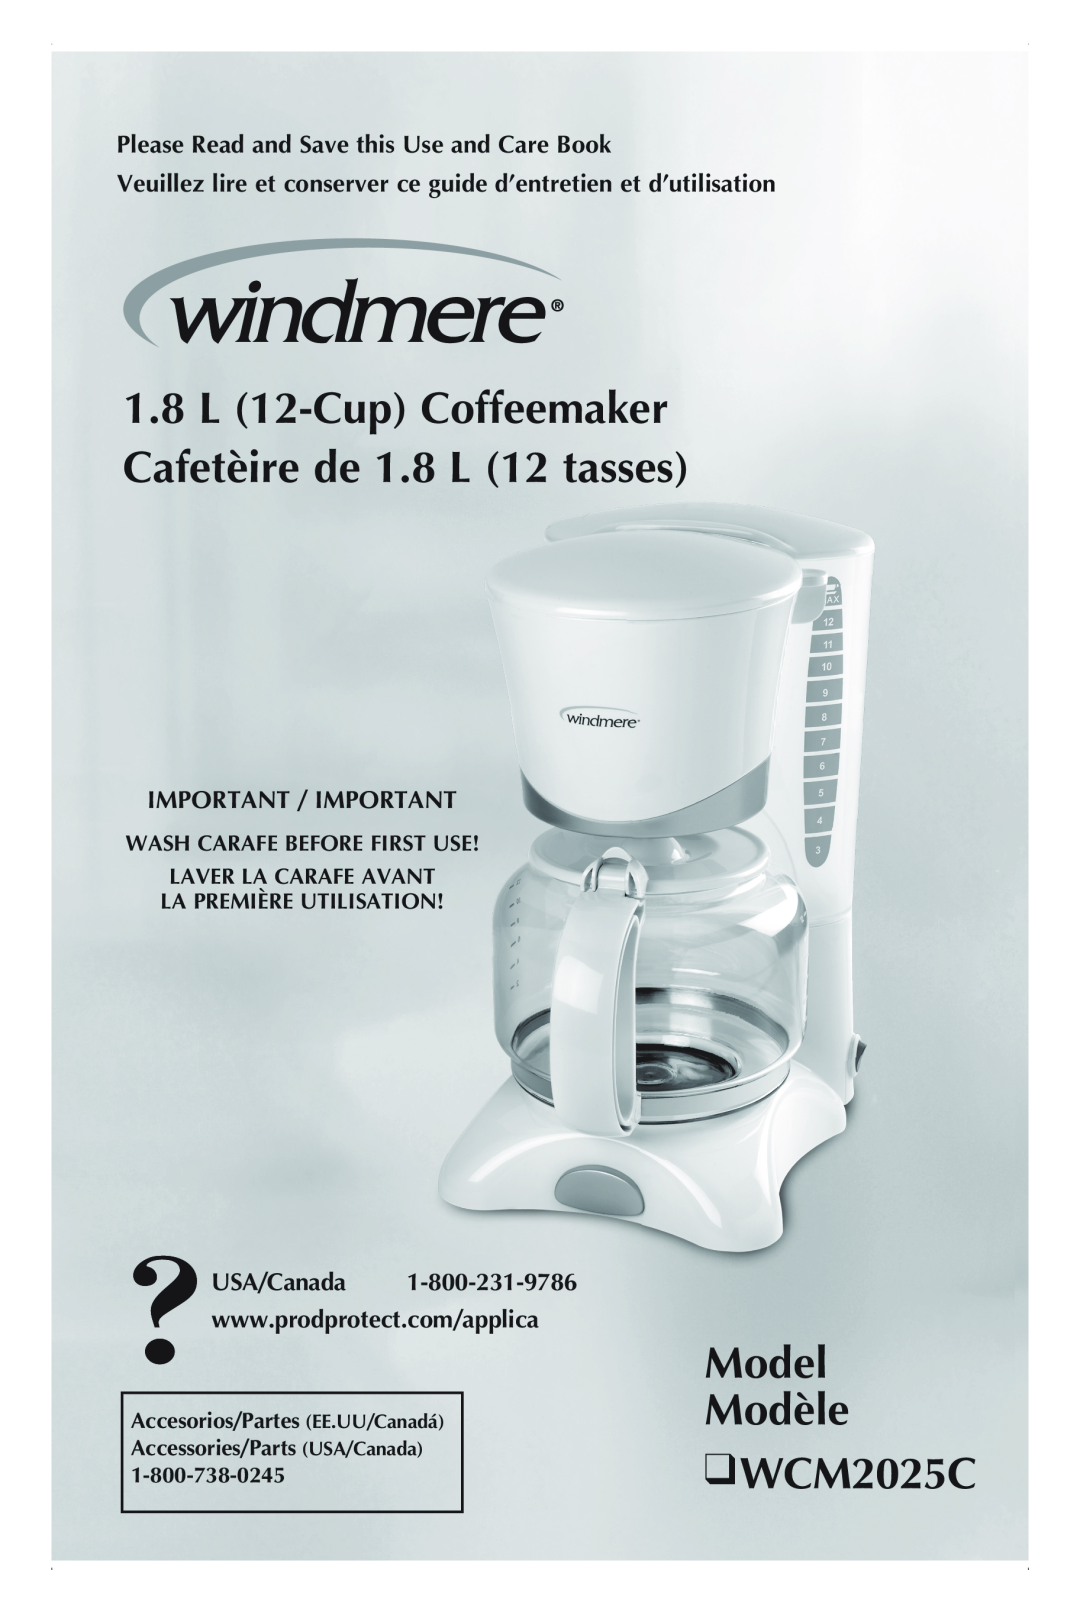 Windmere manual Model Modèle WCM2025C, Please Read and Save this Use and Care Book, Important / Important 